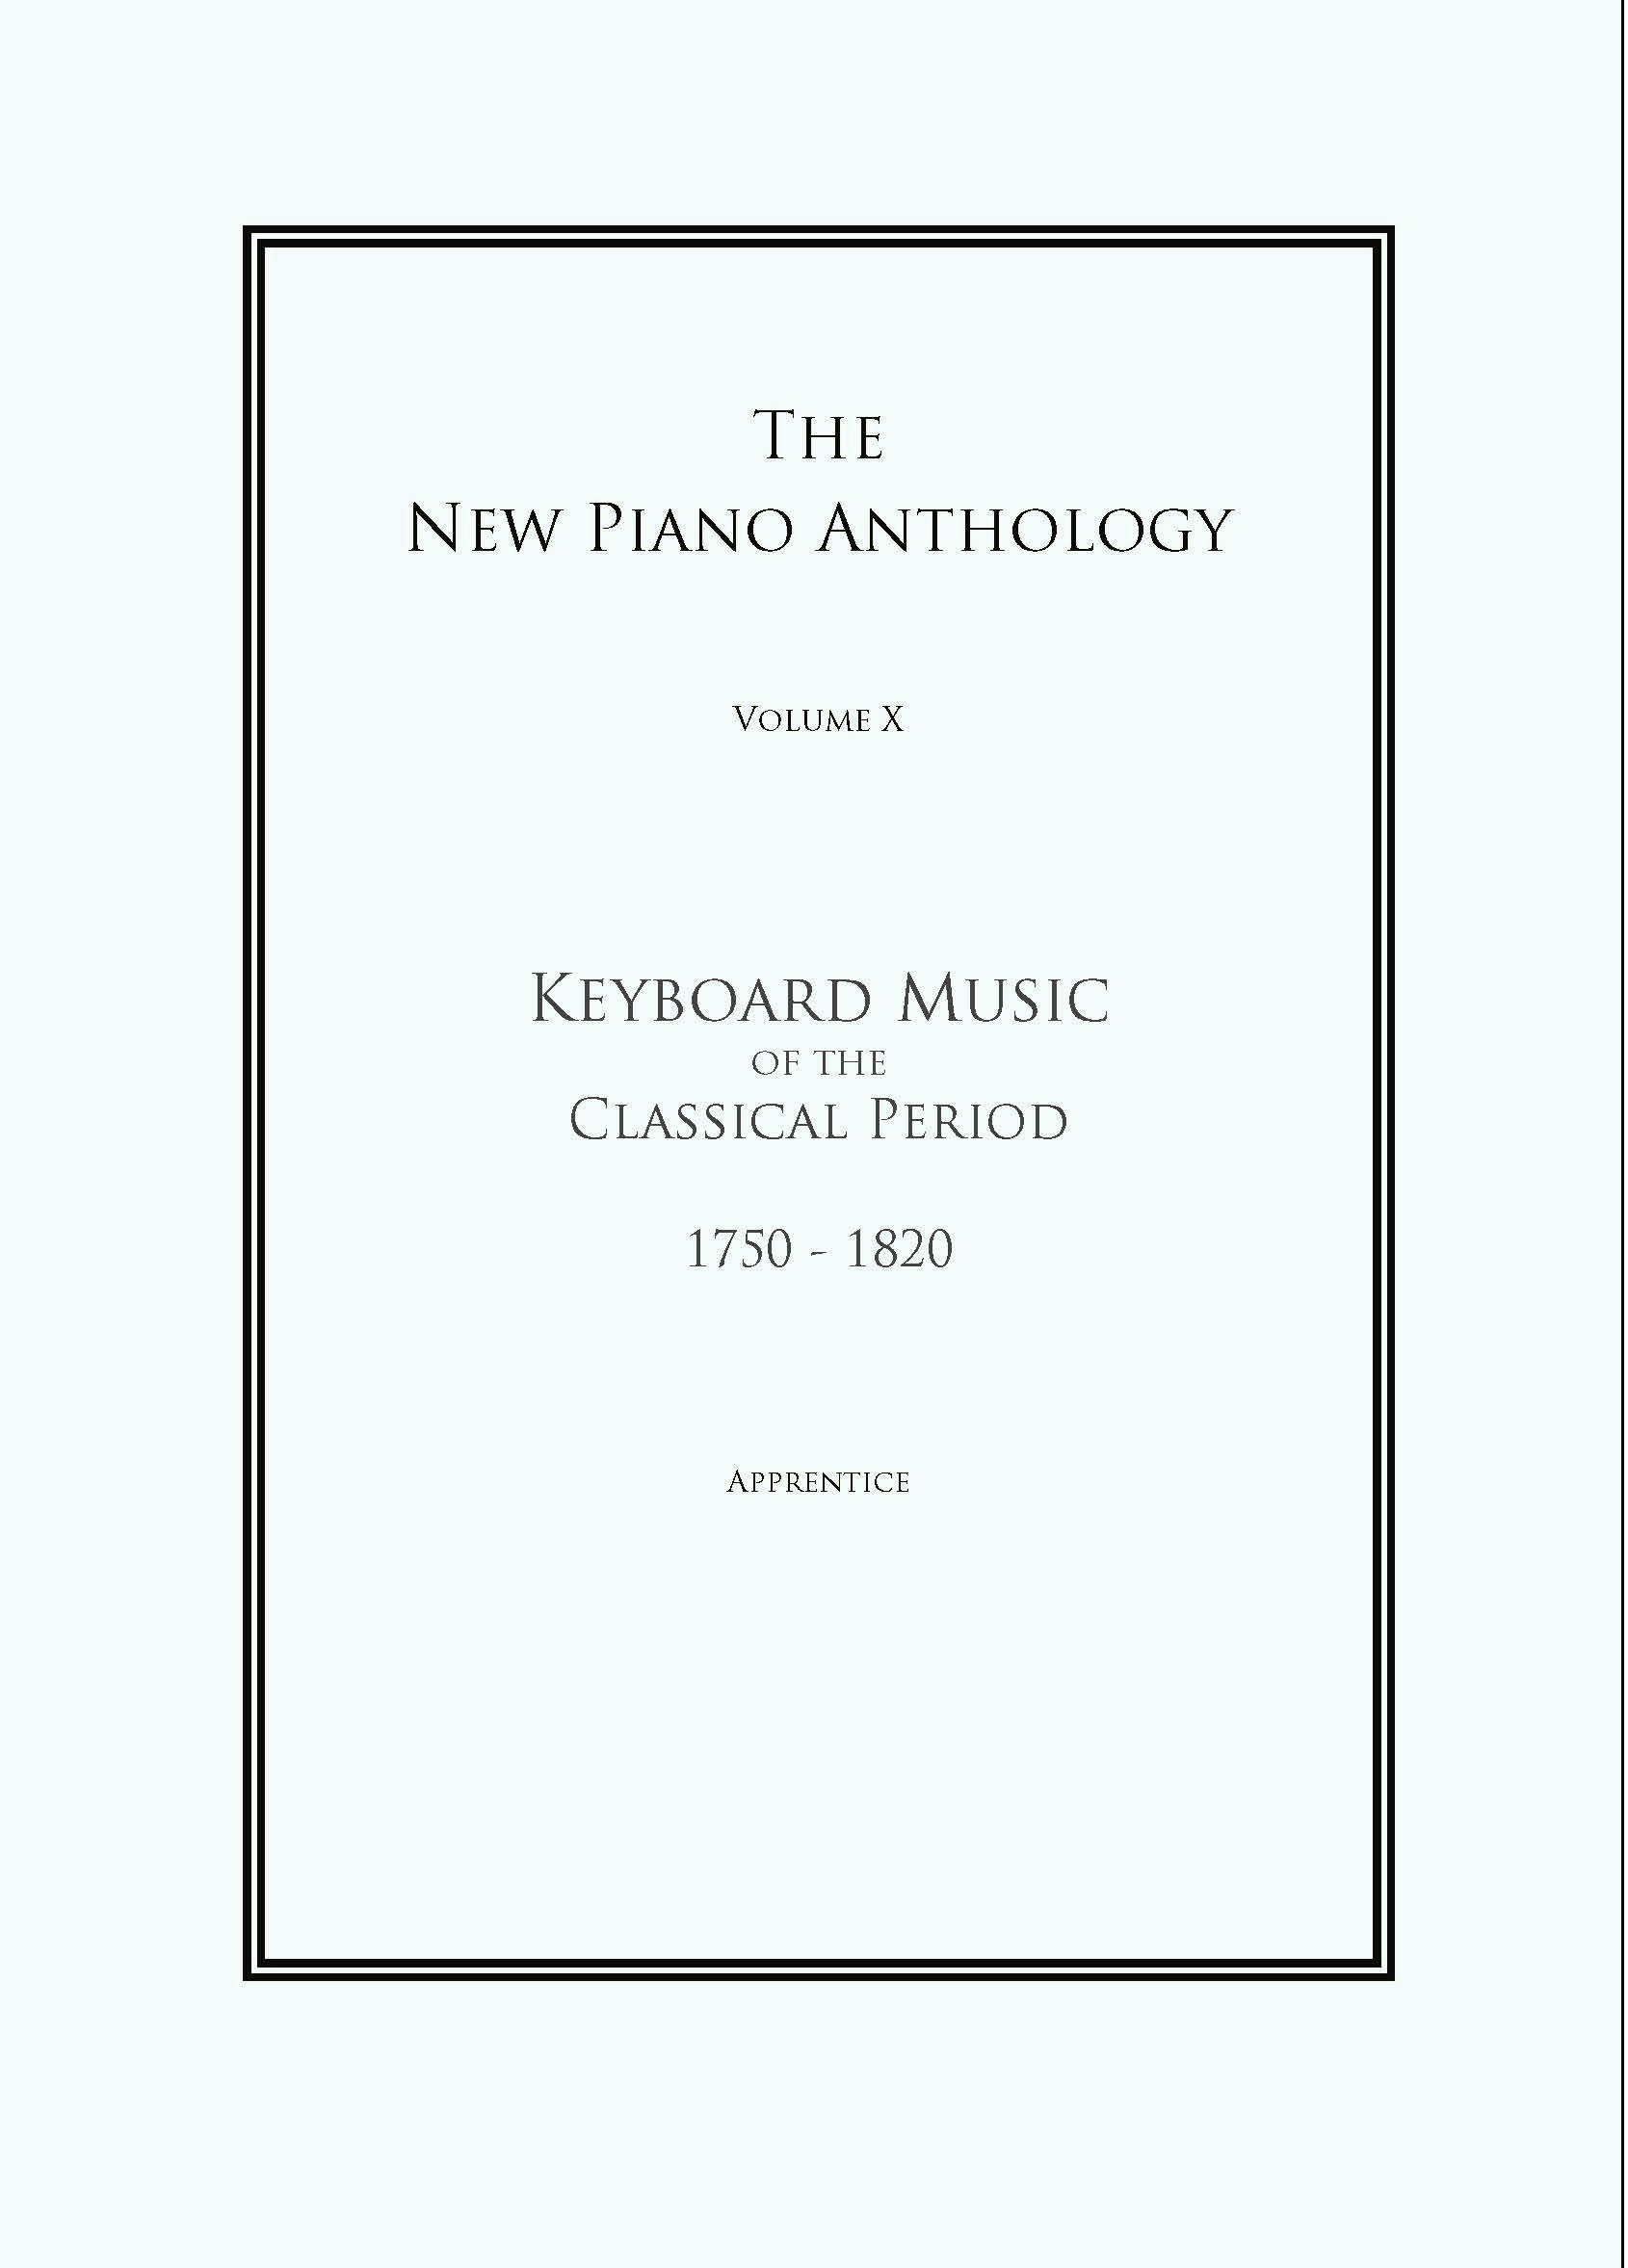 Keyboard Music of the Classical Period 1750 - 1820 (Apprentice)